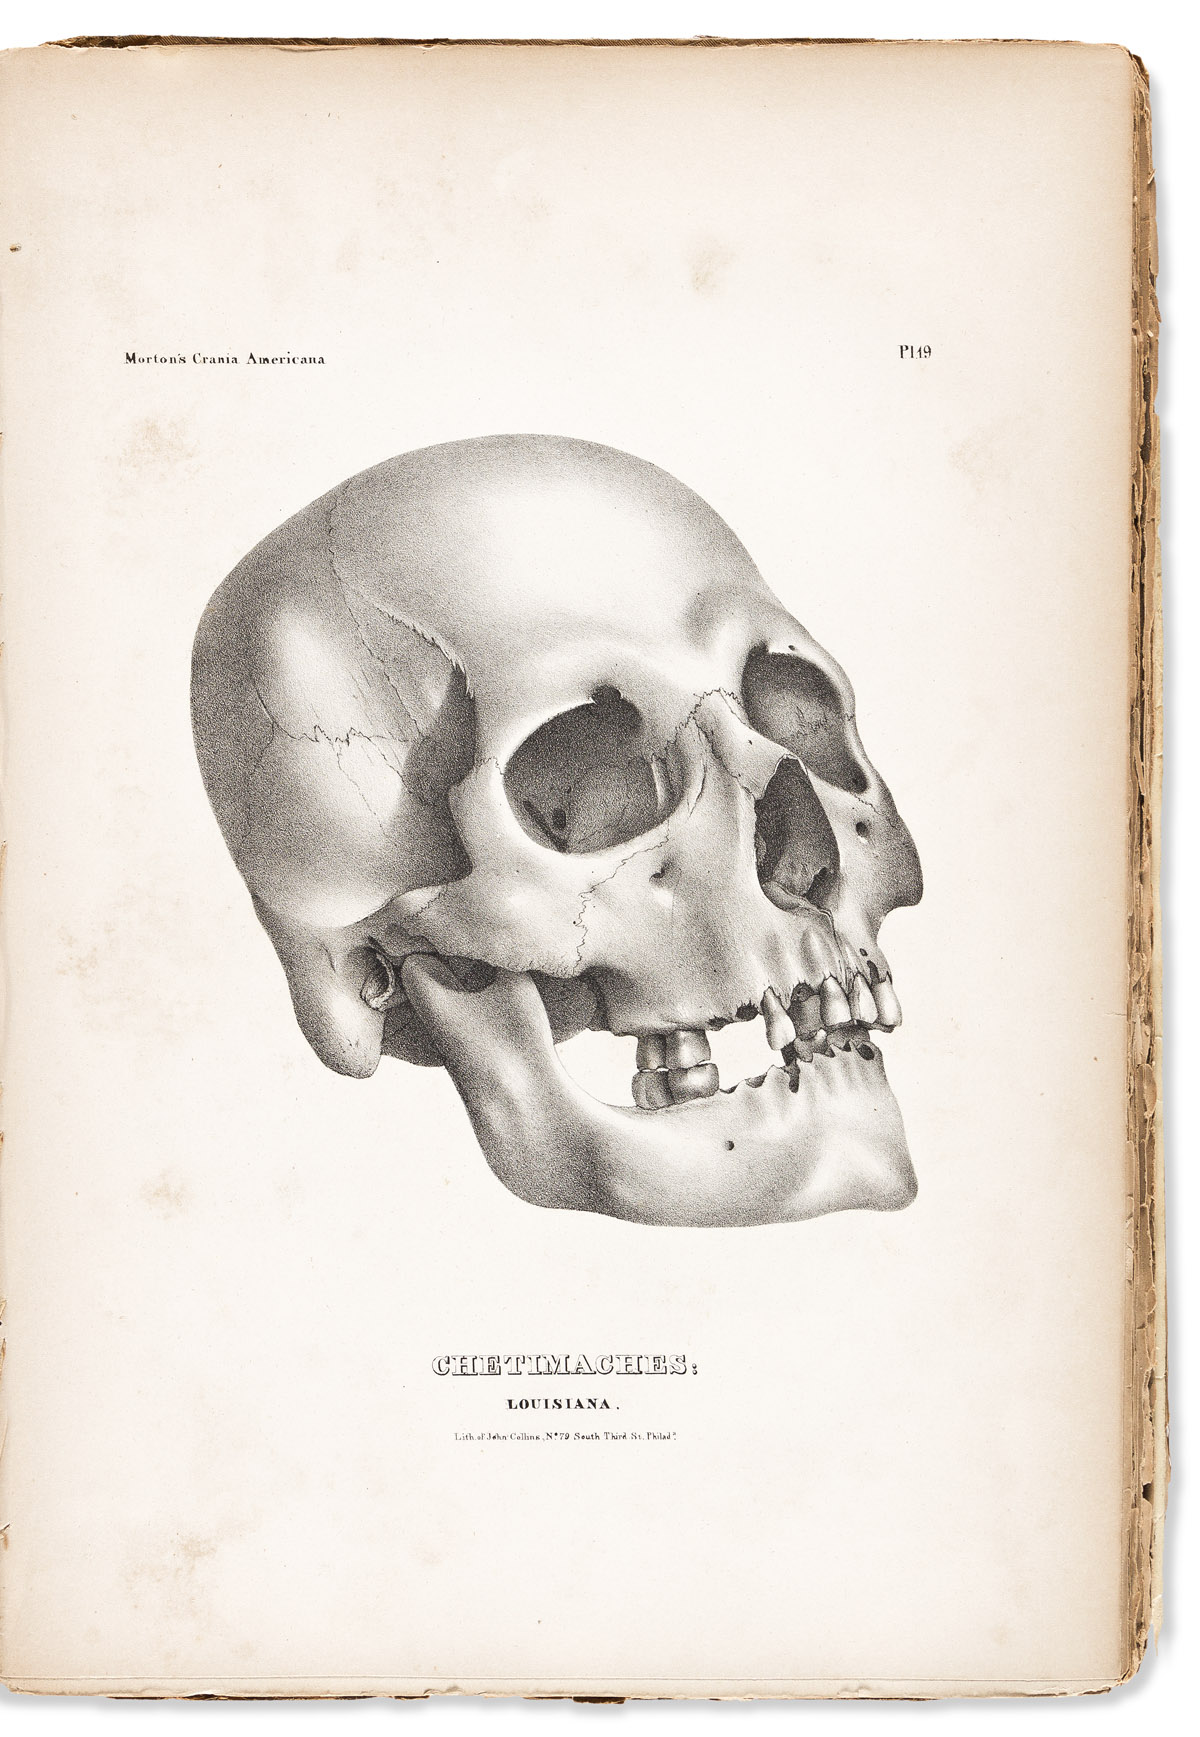 (AMERICAN INDIANS.) Samuel George Morton. Crania Americana; or, A Comparative View of the Skulls of Various Aboriginal Nations